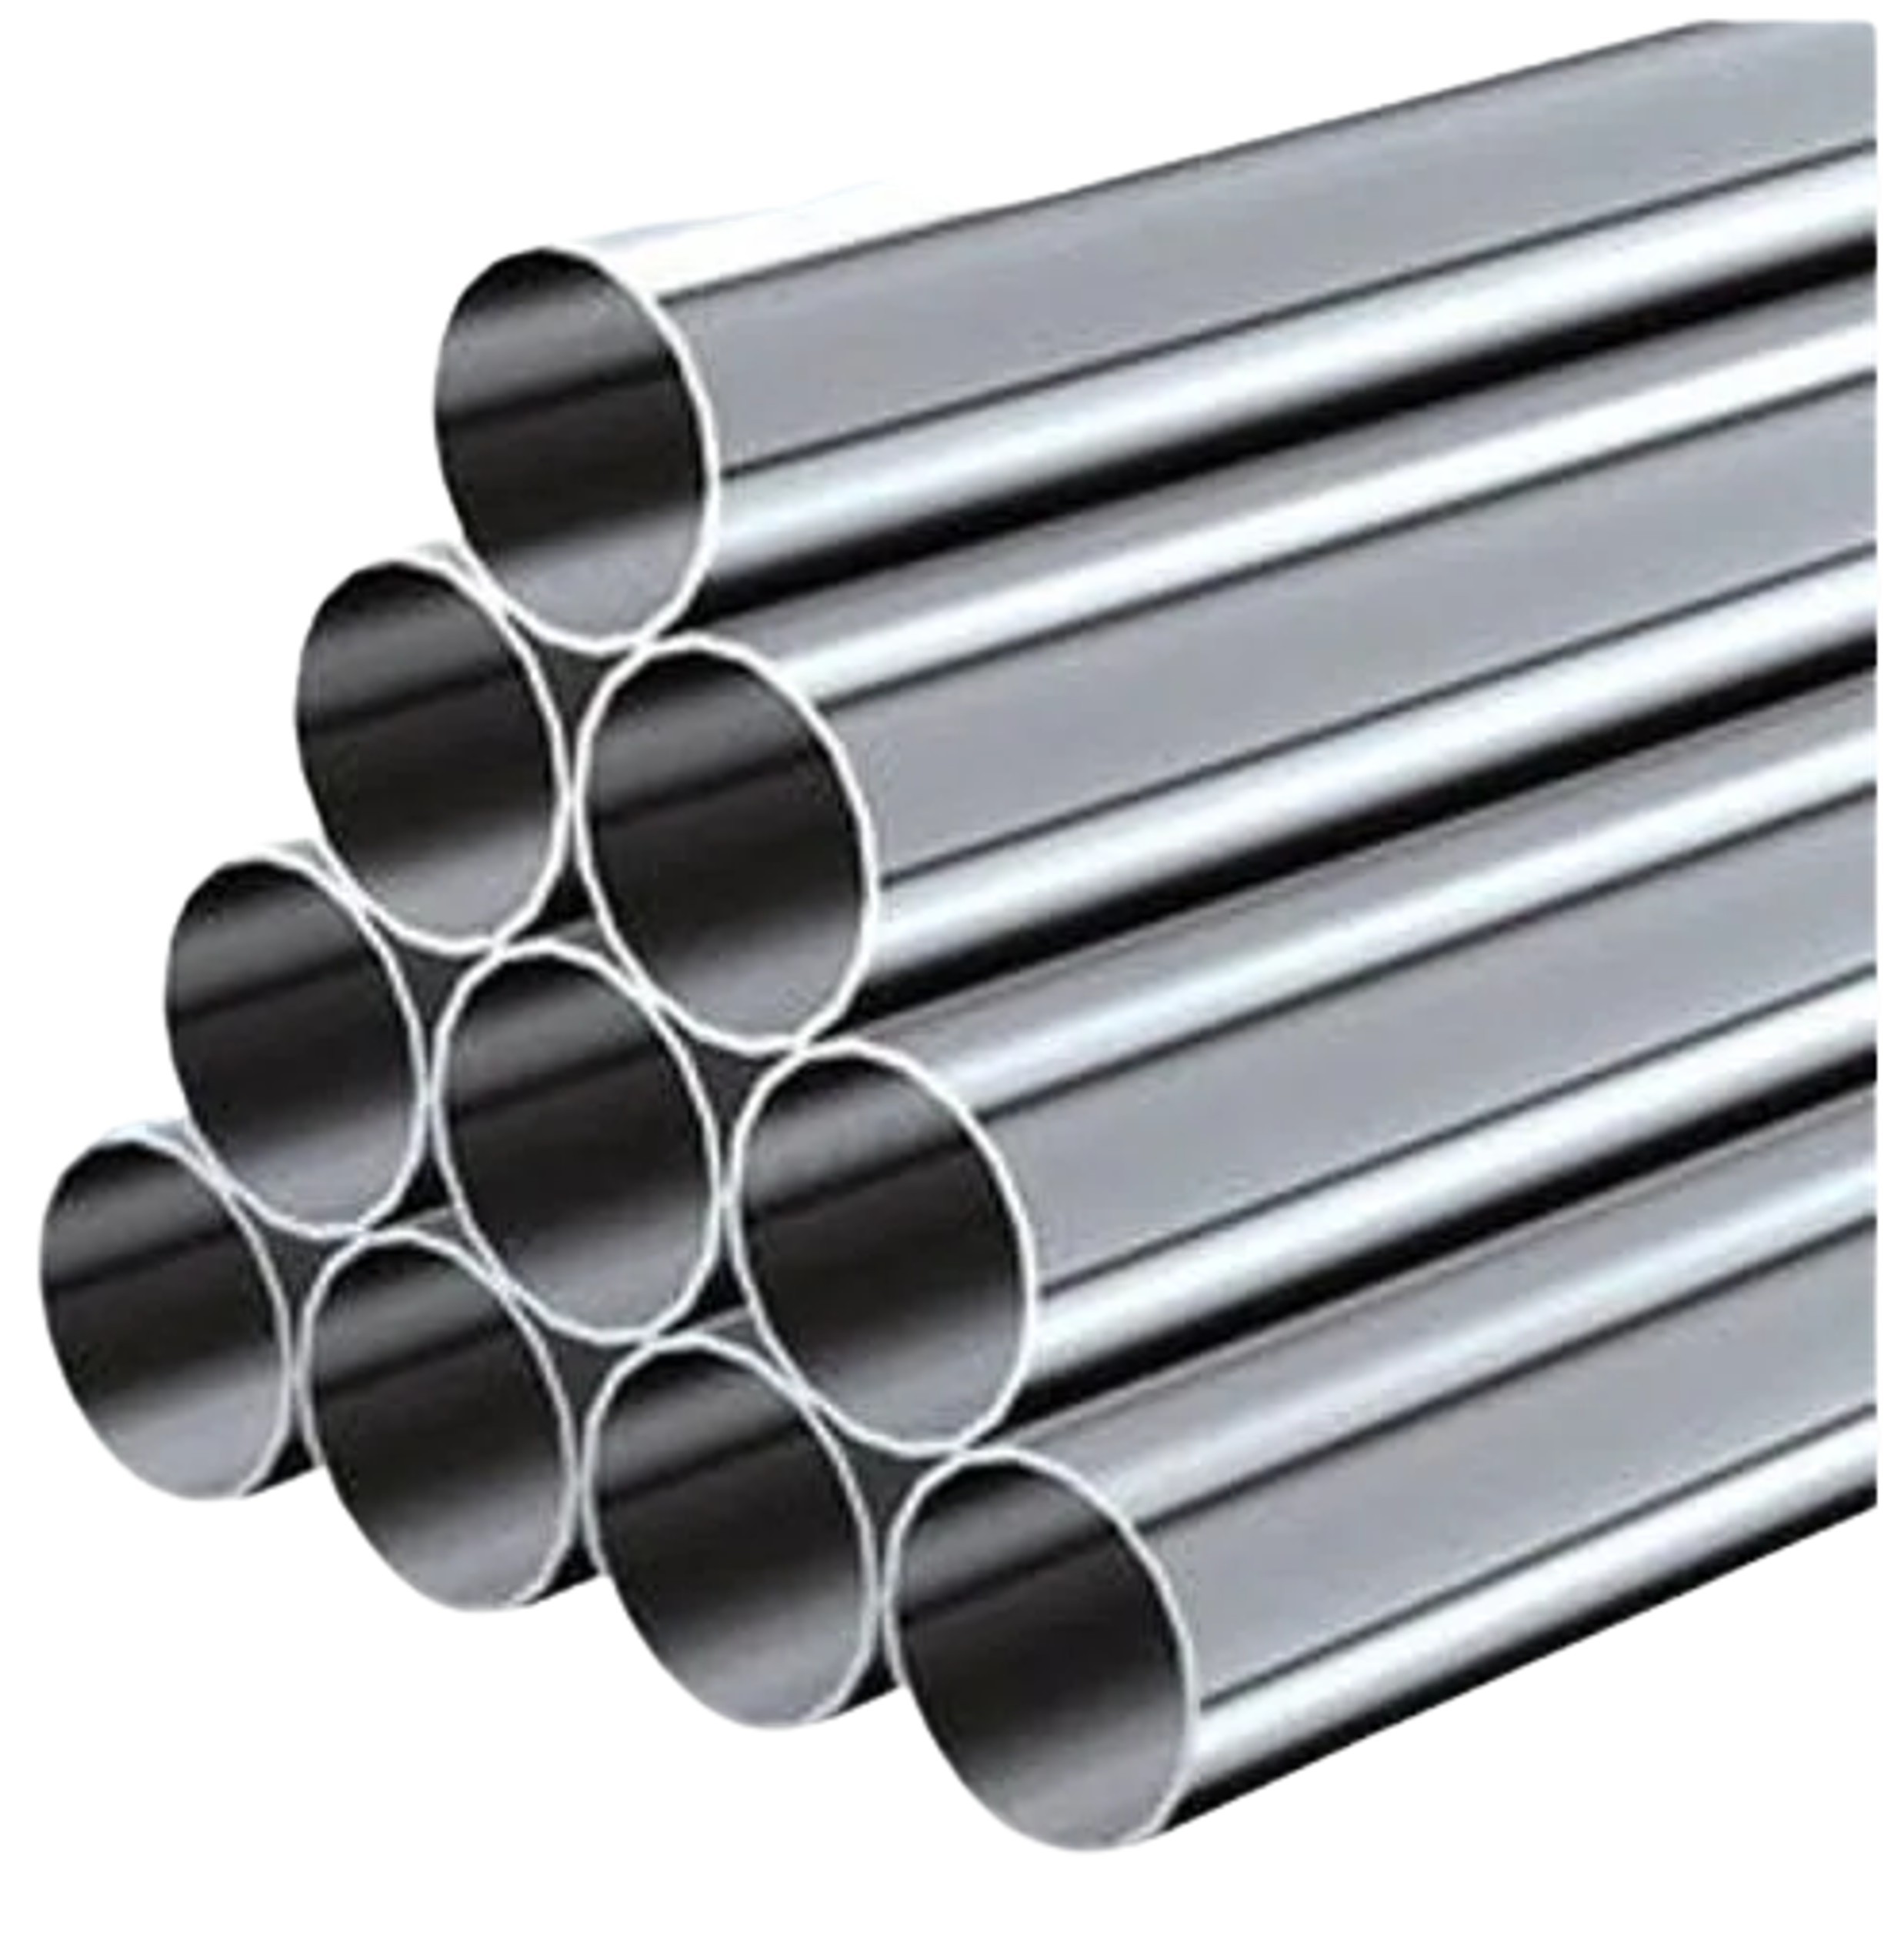 Buy Jindal 100 mm Hot Rolled Stainless Steel Pipes 304 6 m online at best  rates in India | L&T-SuFin